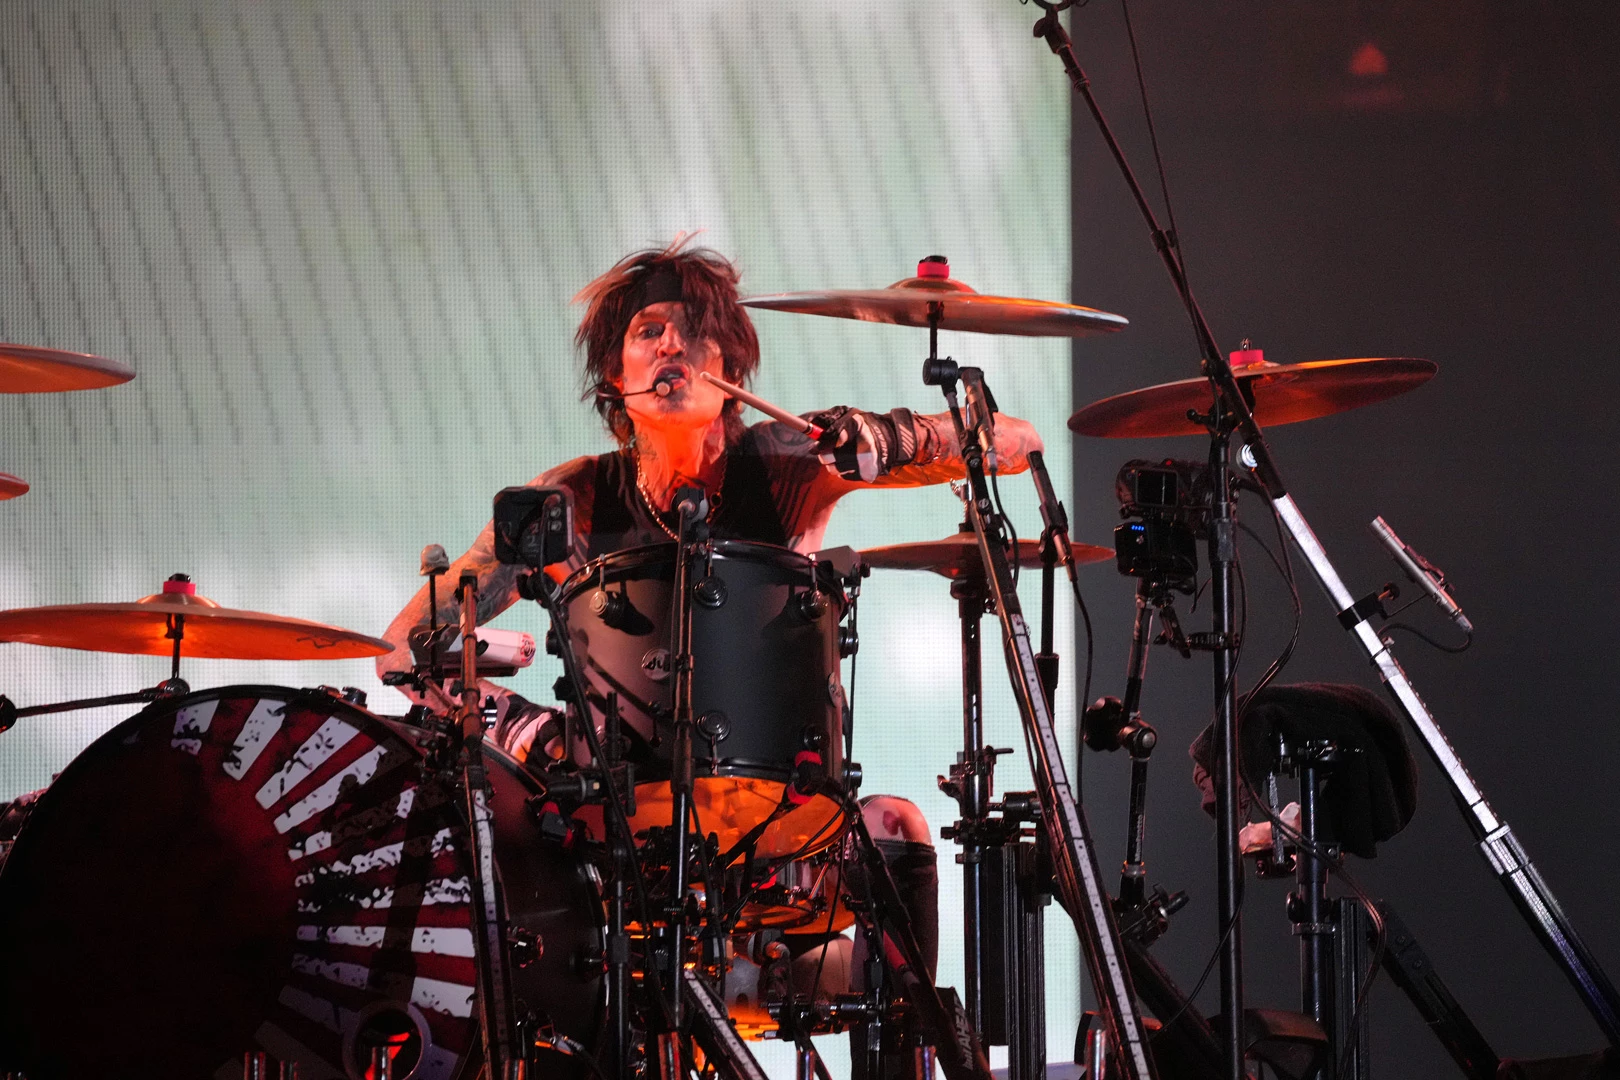 Tommy Lee Plays Full Motley Crue Set for First Time on Tour